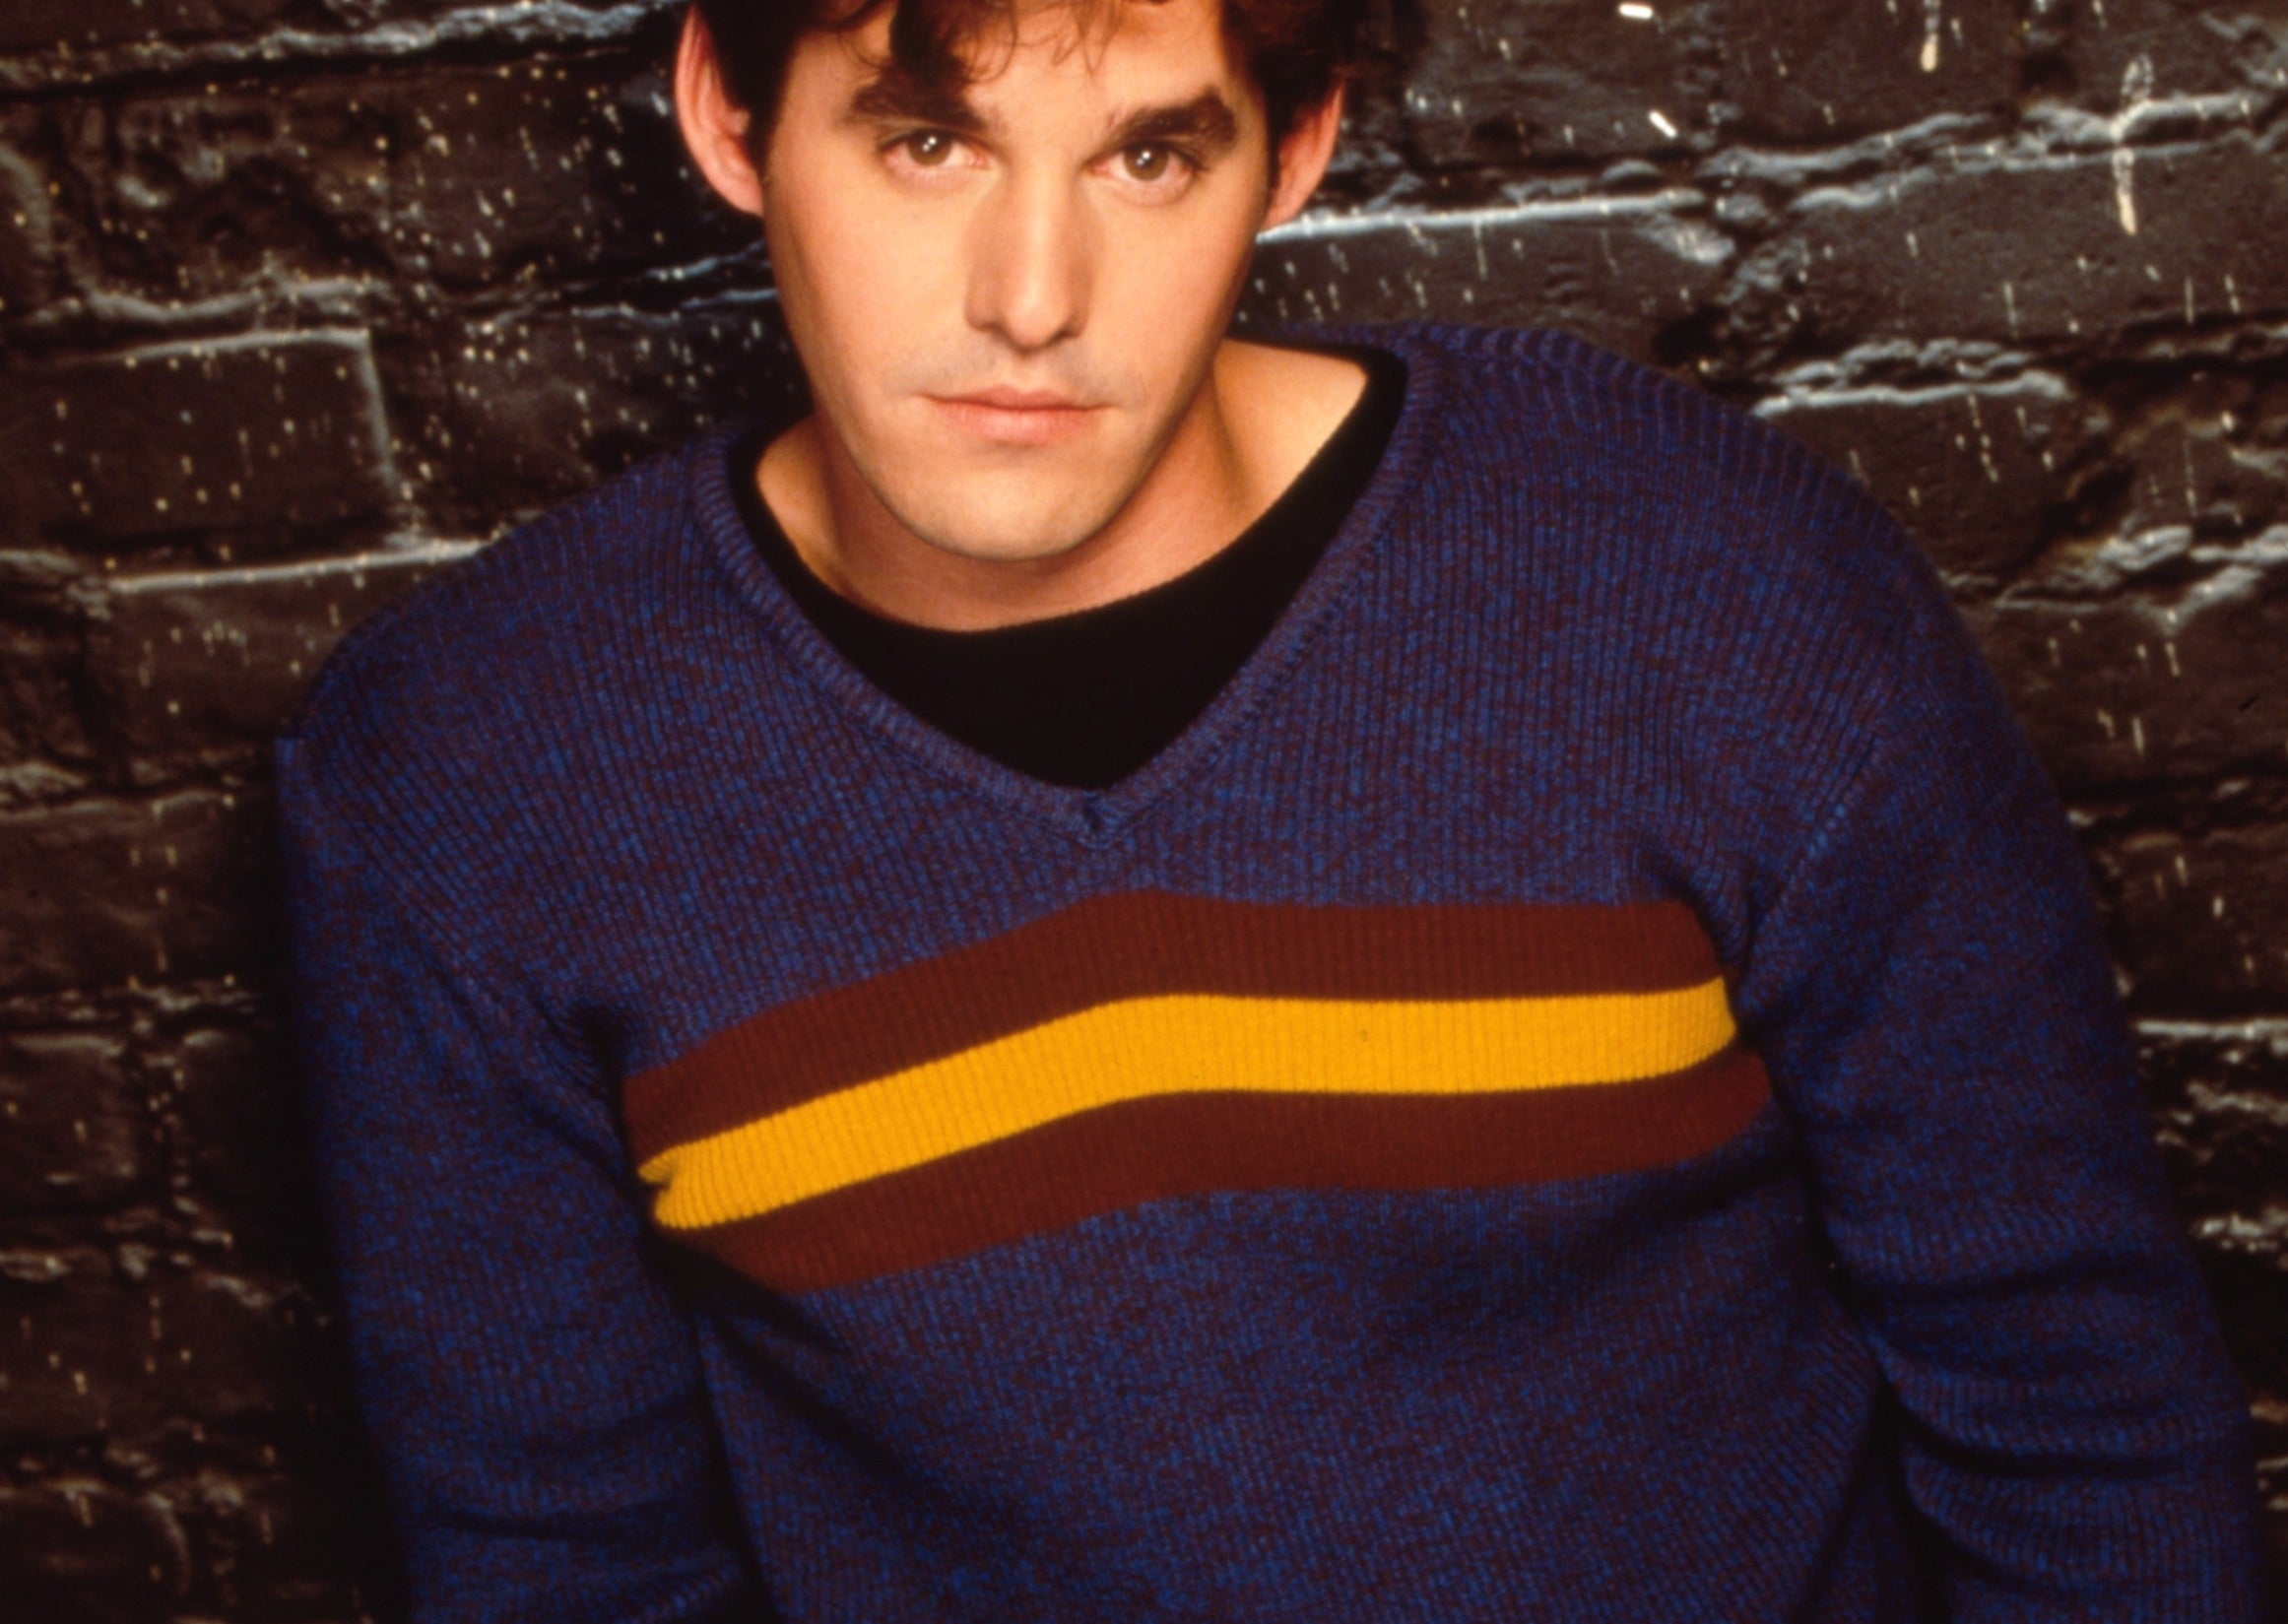 Man in a blue sweater with a yellow and red stripe, leaning against a brick wall